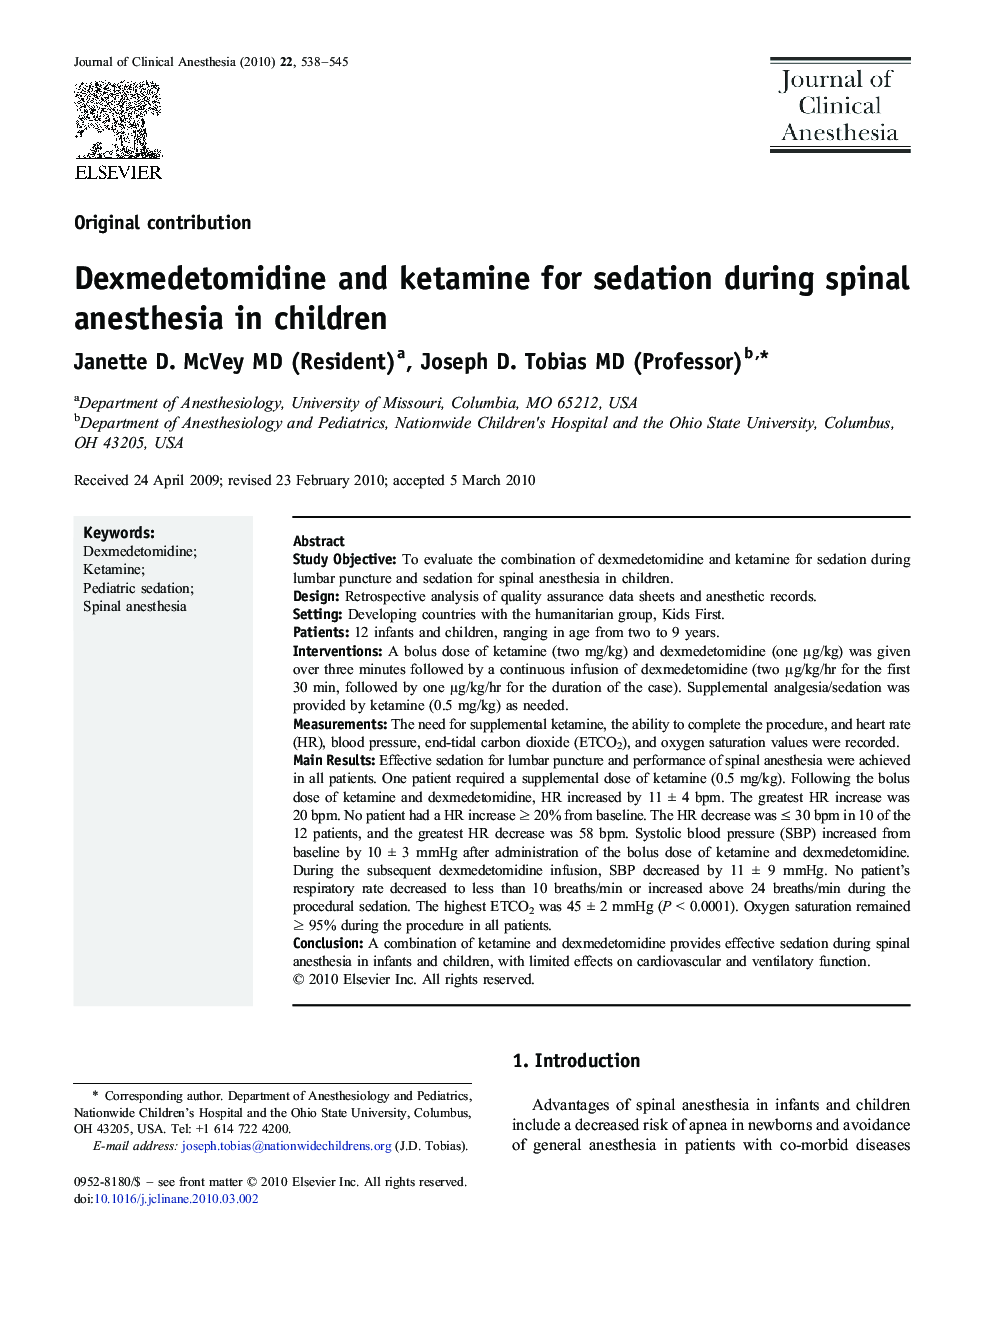 Dexmedetomidine and ketamine for sedation during spinal anesthesia in children